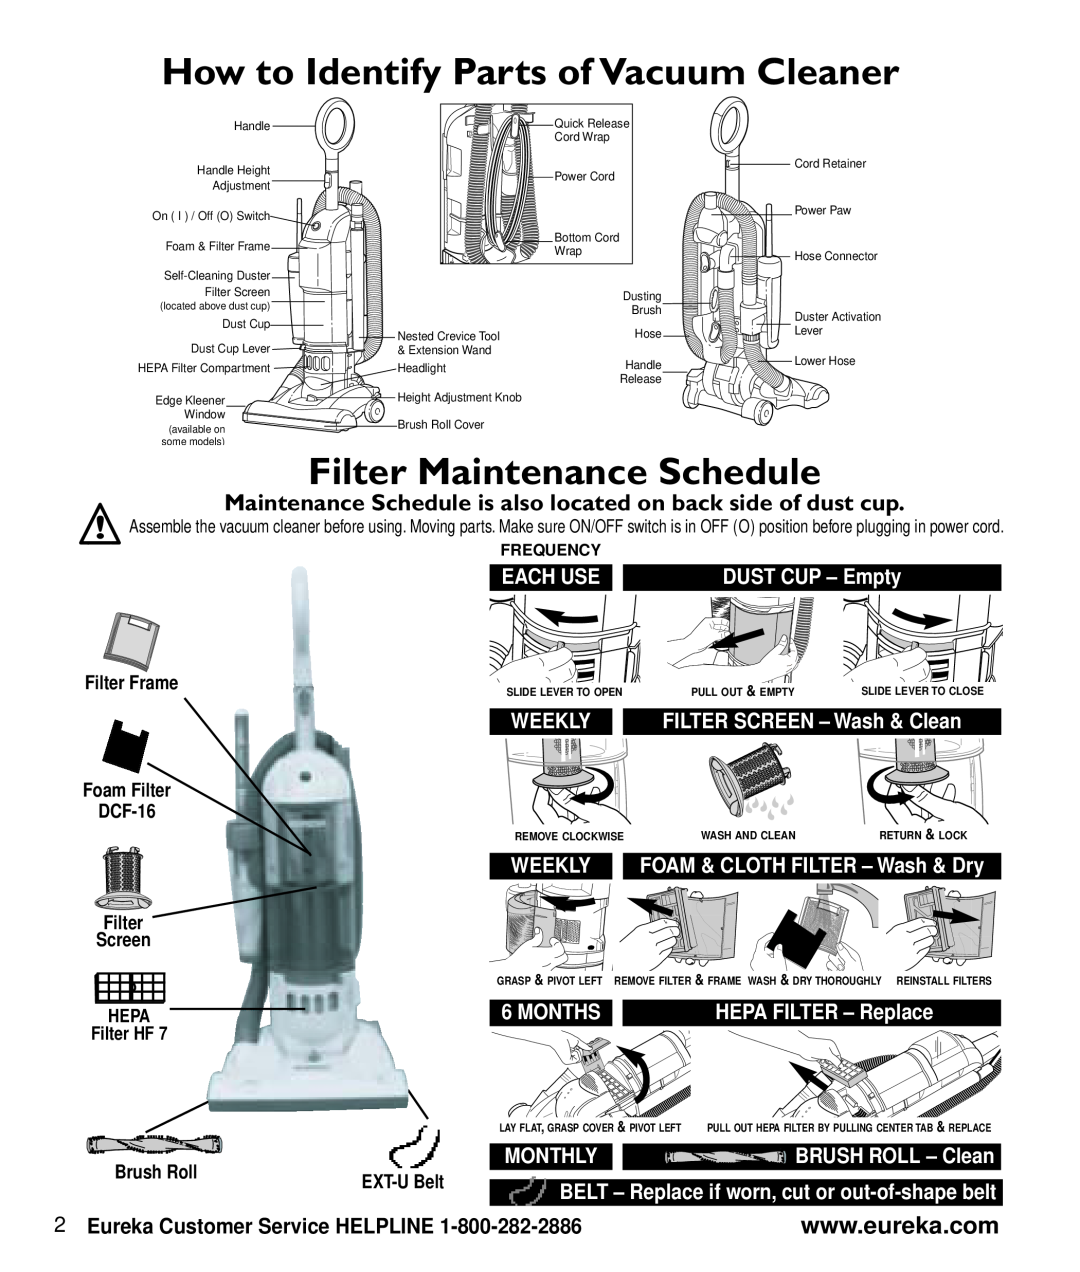 Eureka 2997-2999 Series manual How to Identify Parts of Vacuum Cleaner, Filter Maintenance Schedule, Filter Frame, Each Use 